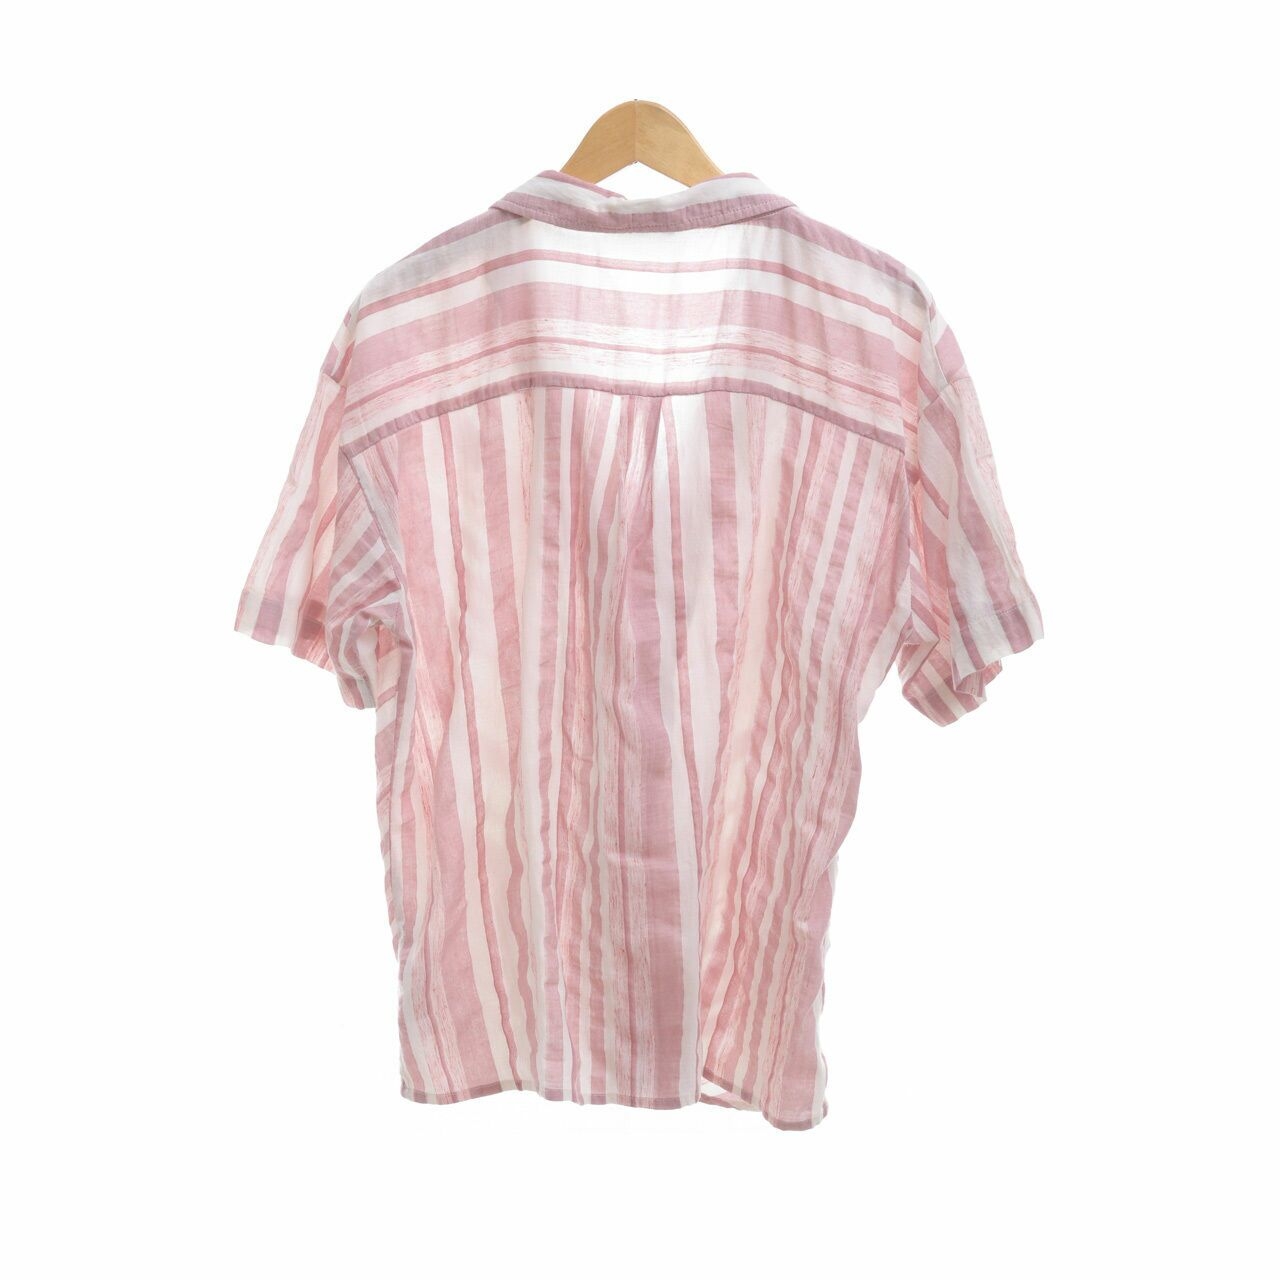 Cotton On Pink & Off White Striped Shirt